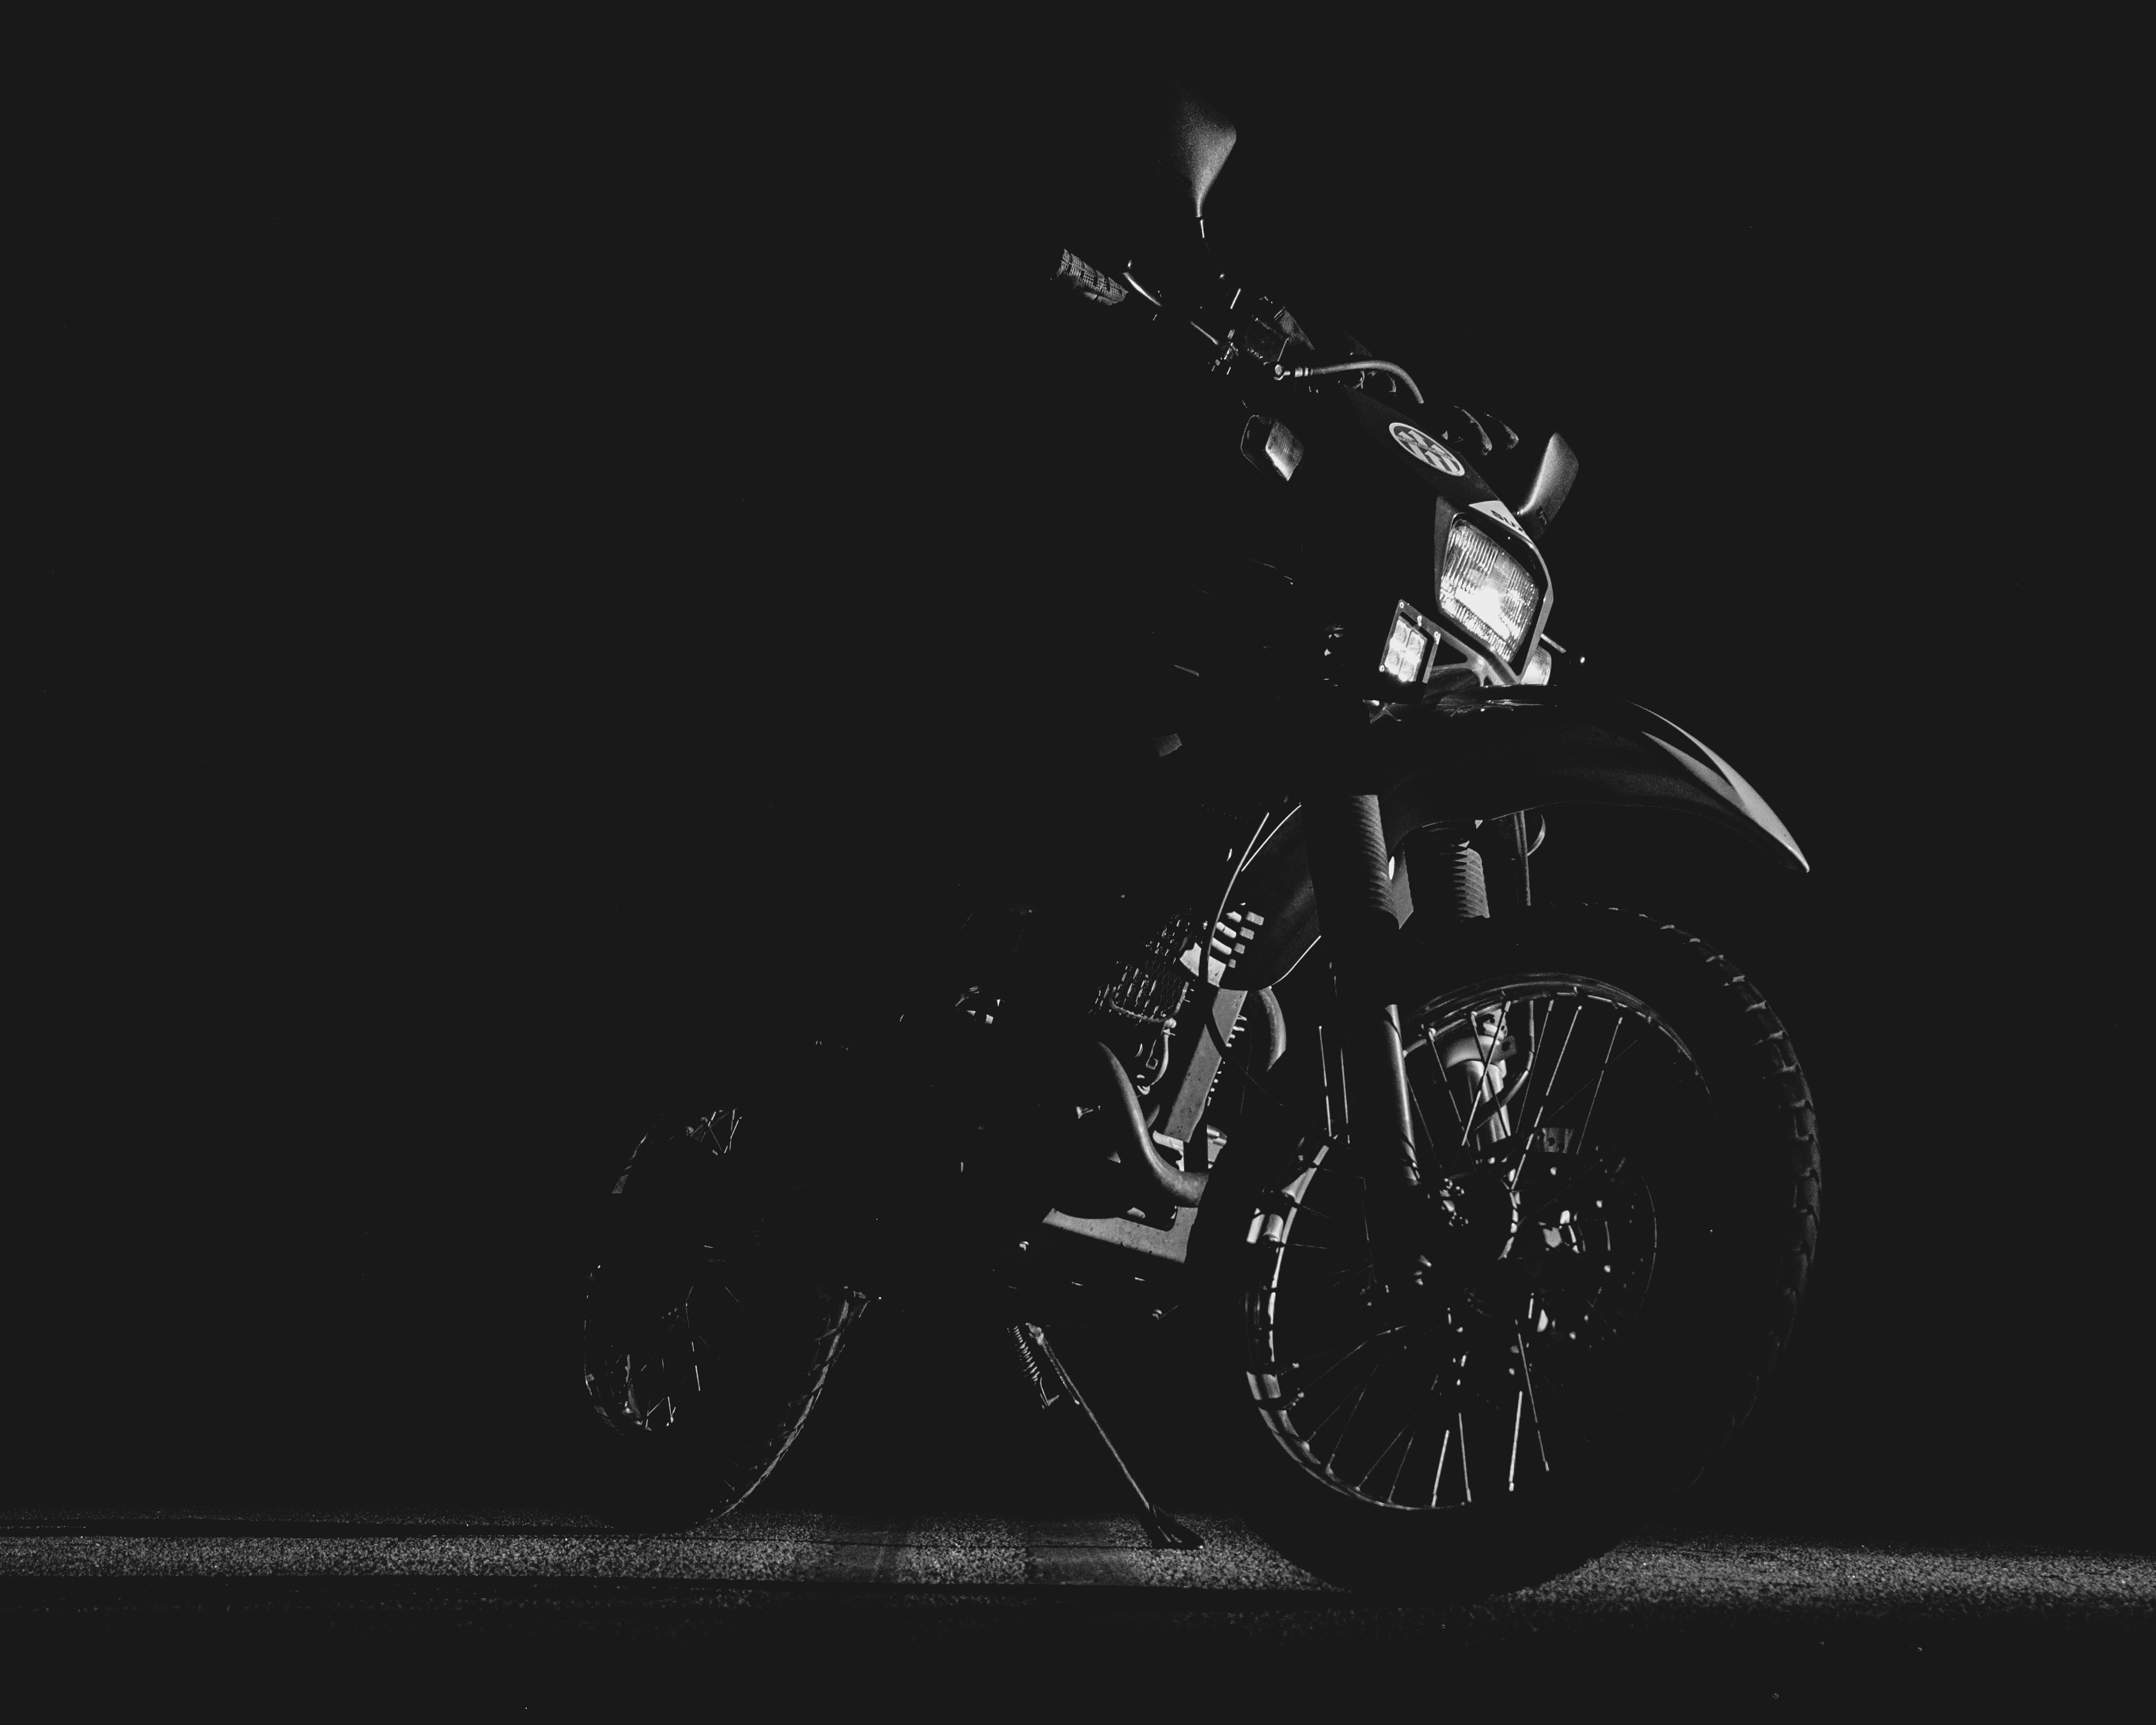 Cool Backgrounds wheel, chb, motorcycles, bw Motorcycle